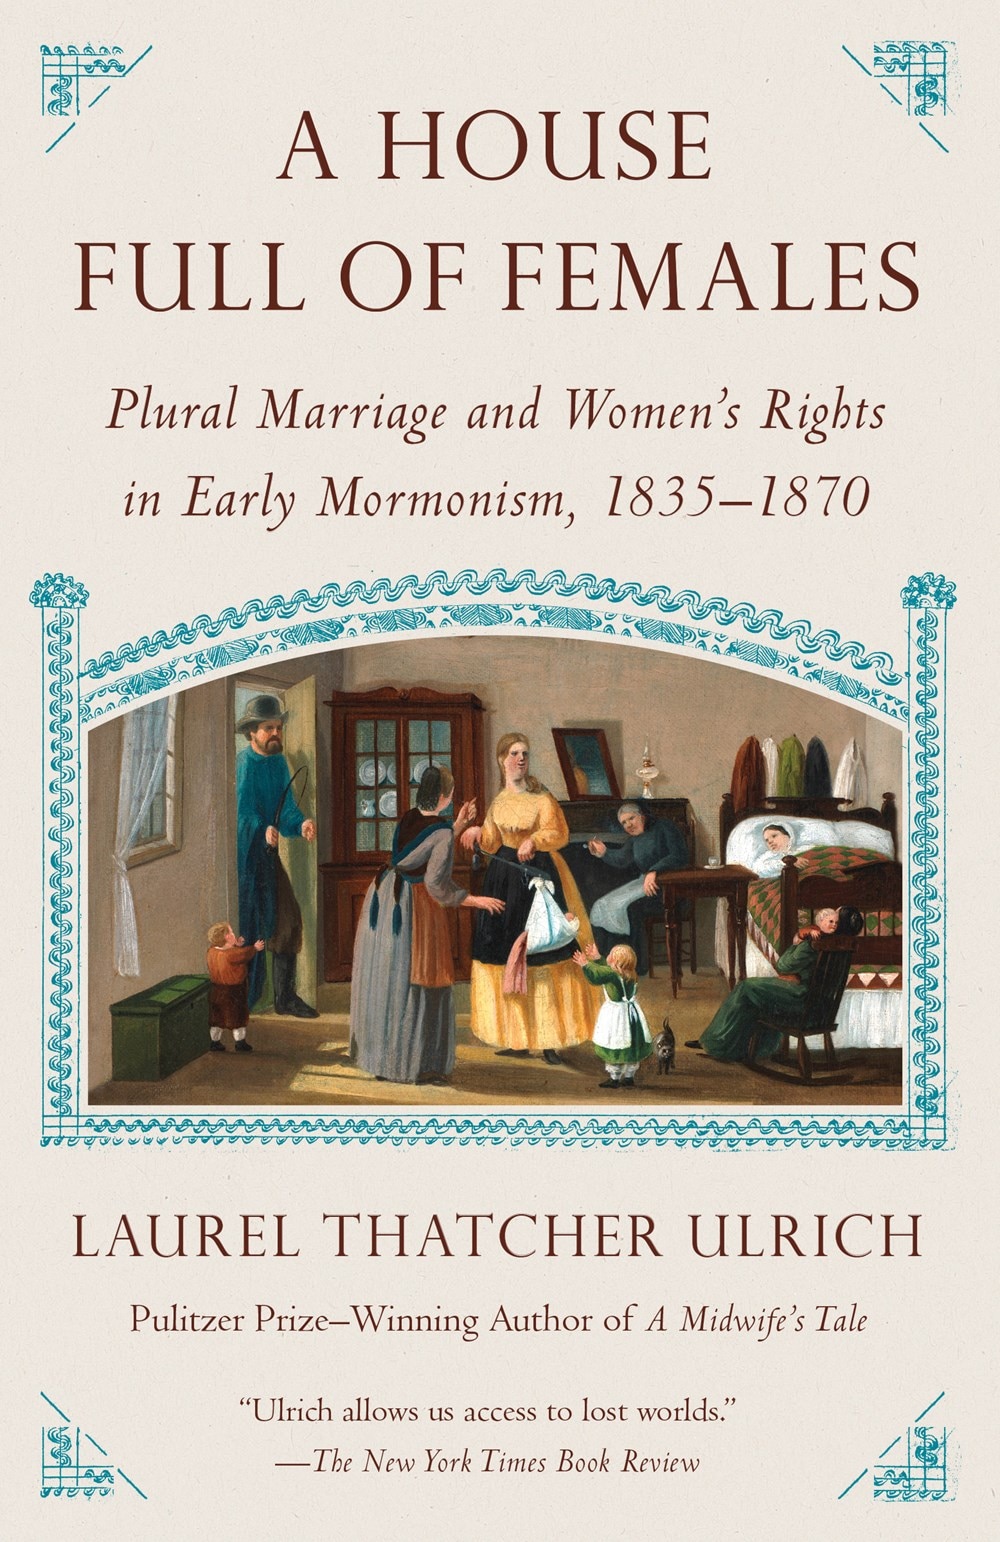 A House Full of Females: Plural Marriage and Women's Rights in Early Mormonism  1835-1870